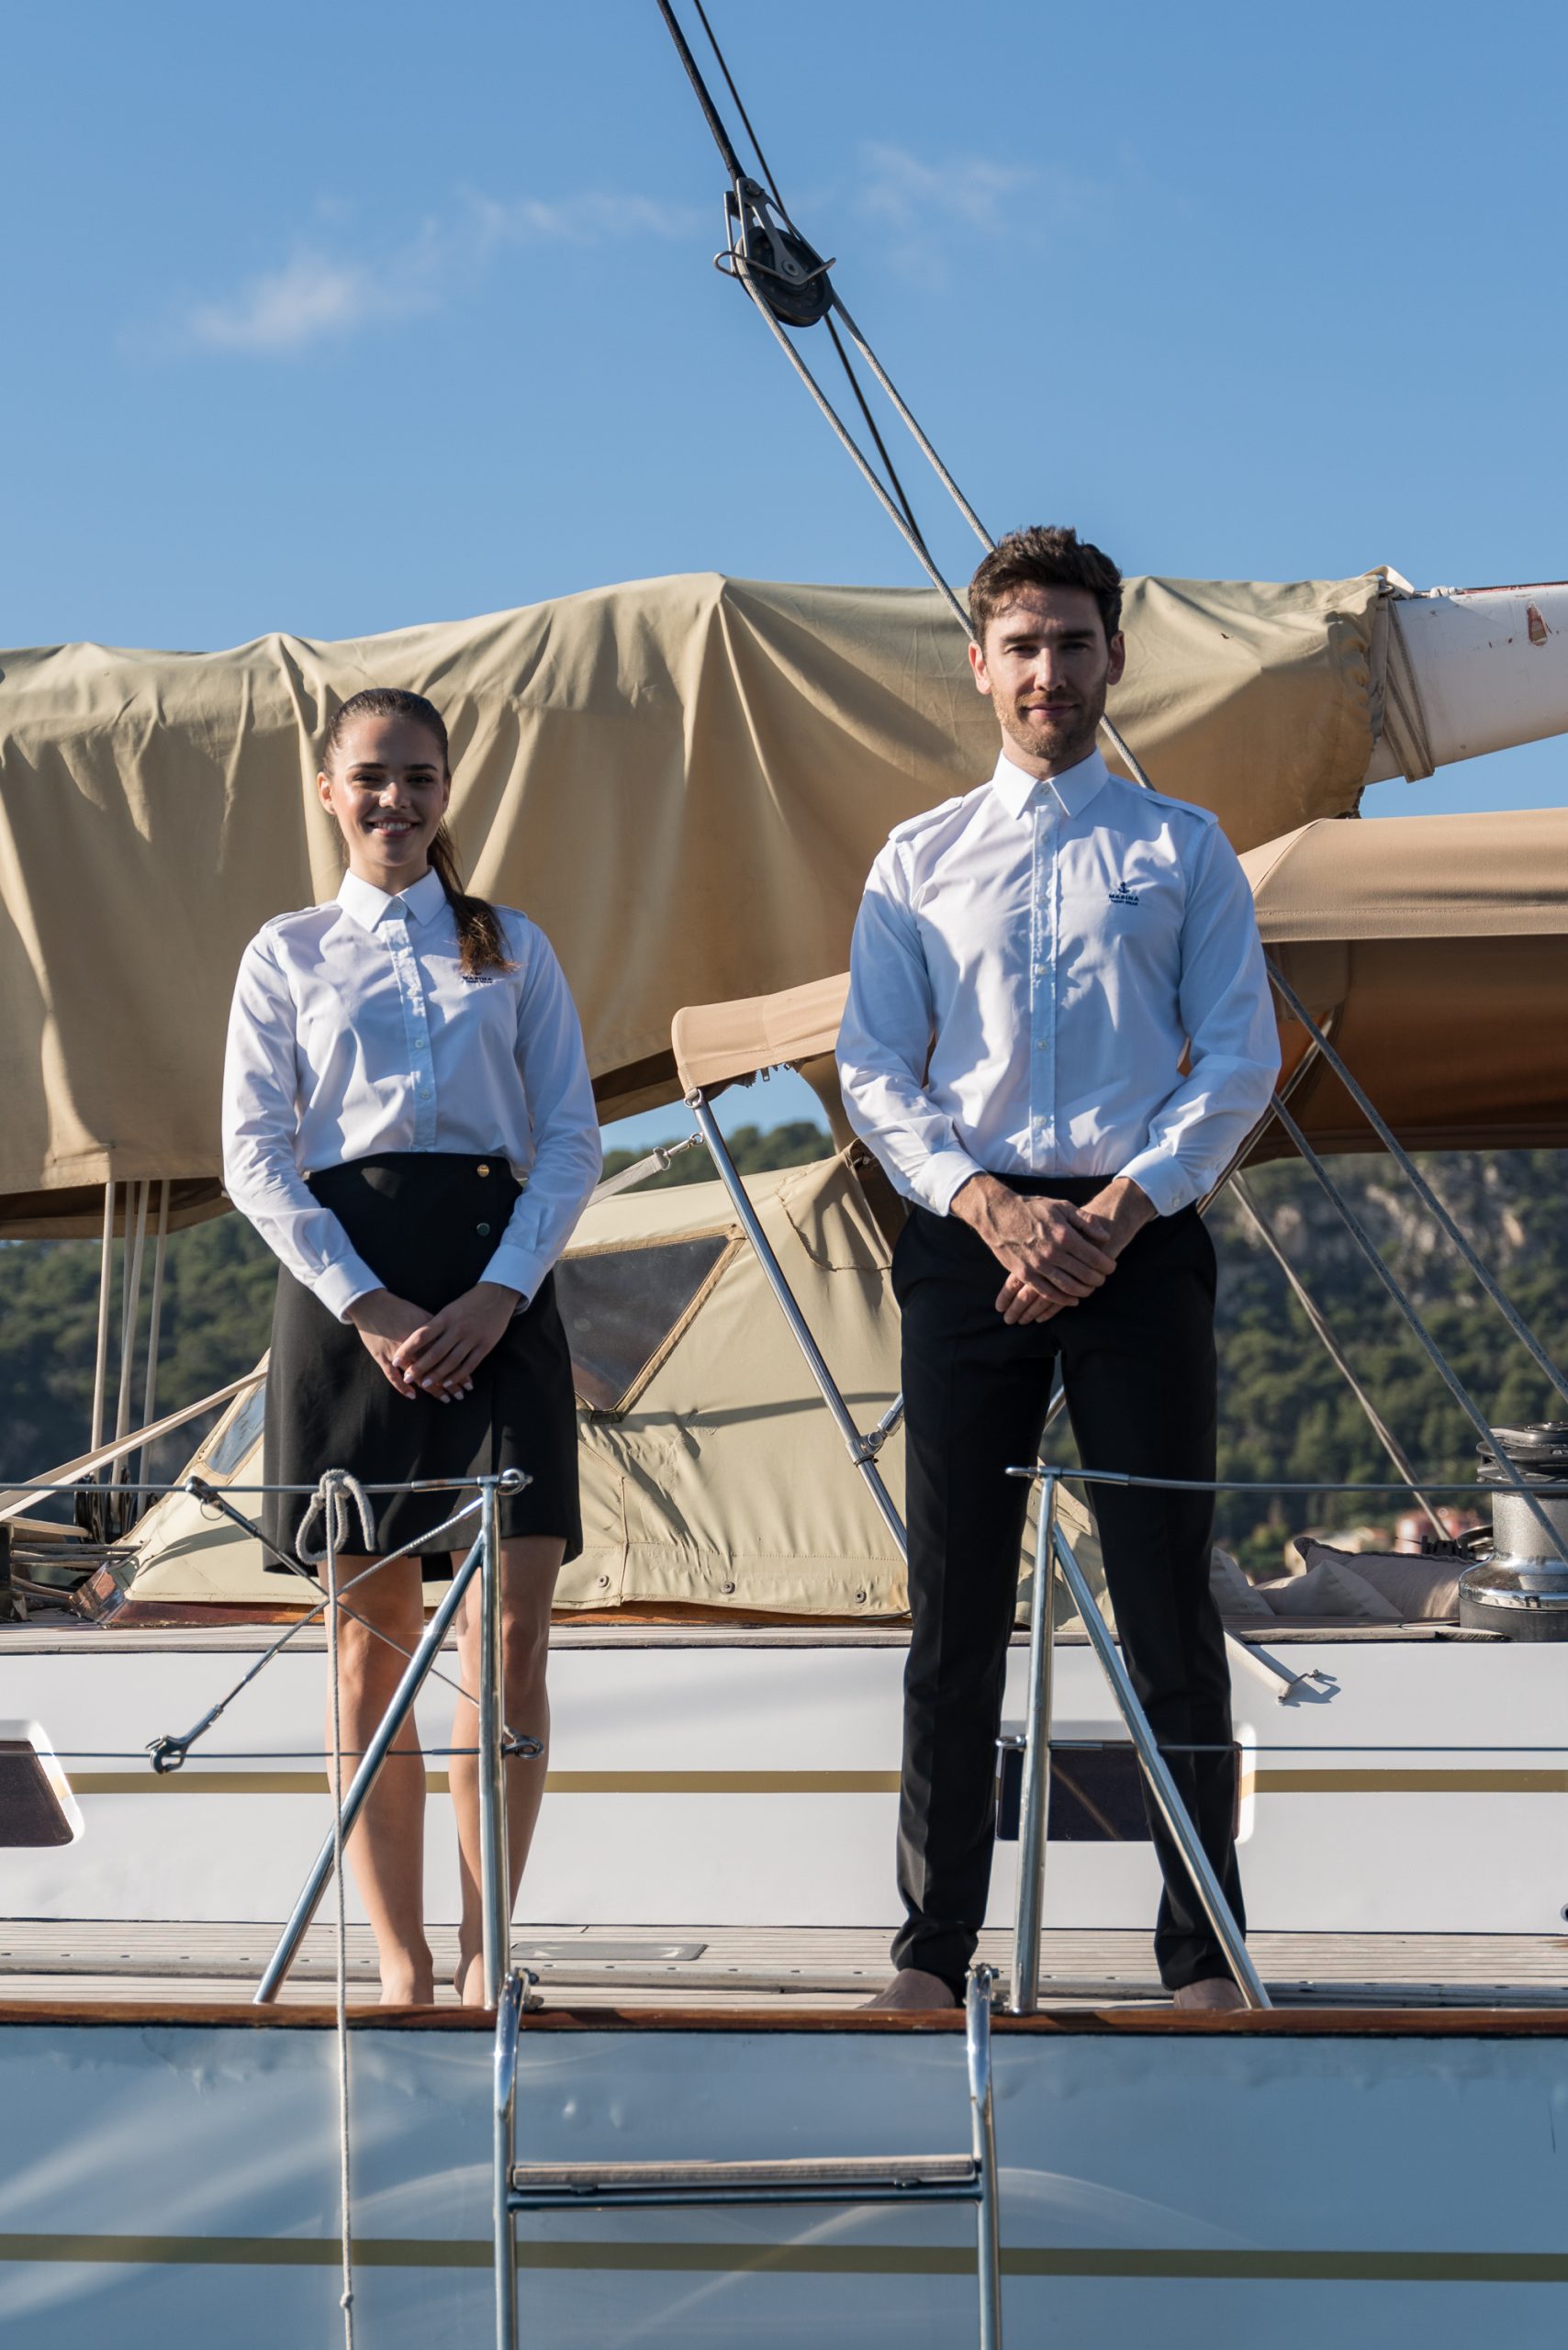 yacht clothing items